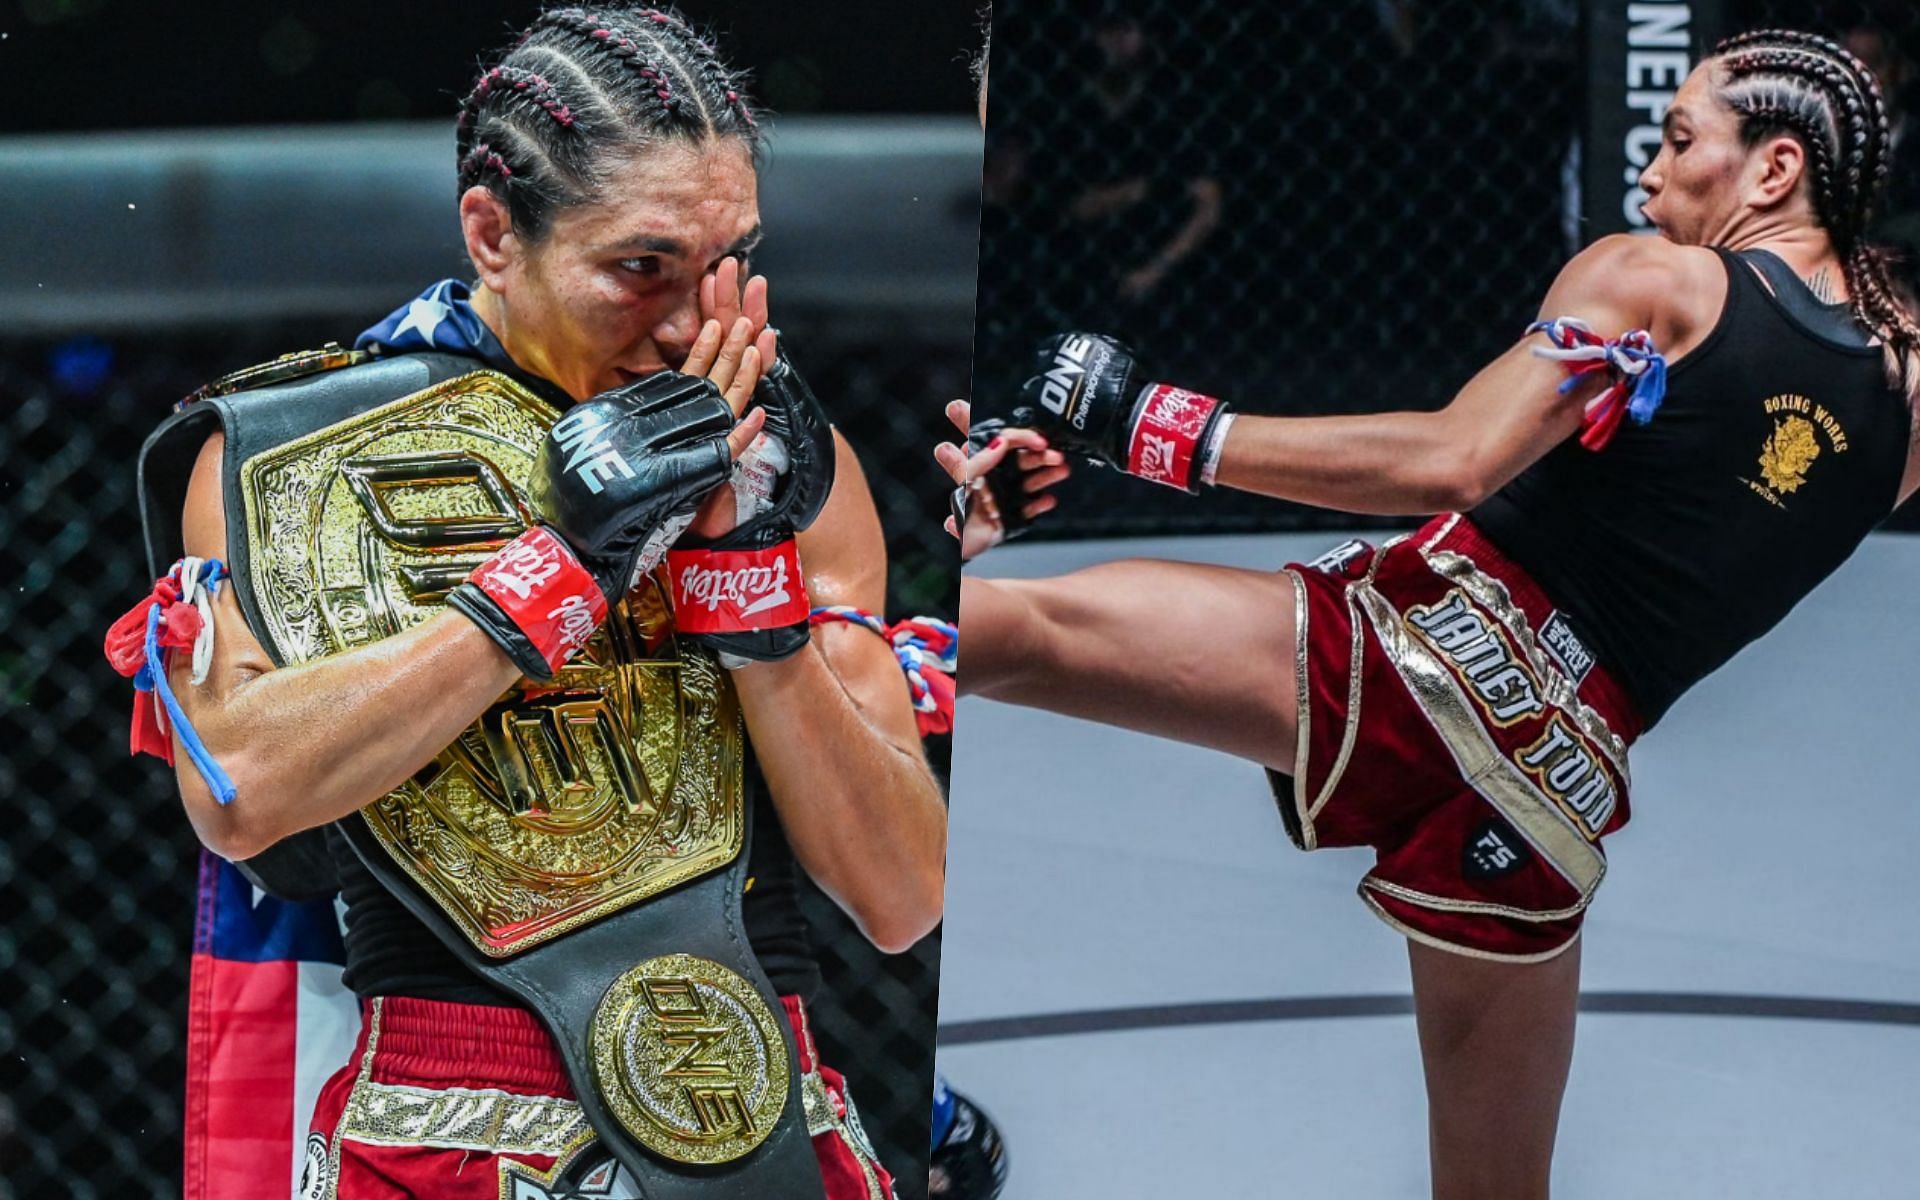 Janett Todd will to become the undisputed ONE atomweight Muay Thai queen at ONE Fight Night 8. | Photo by ONE Championship